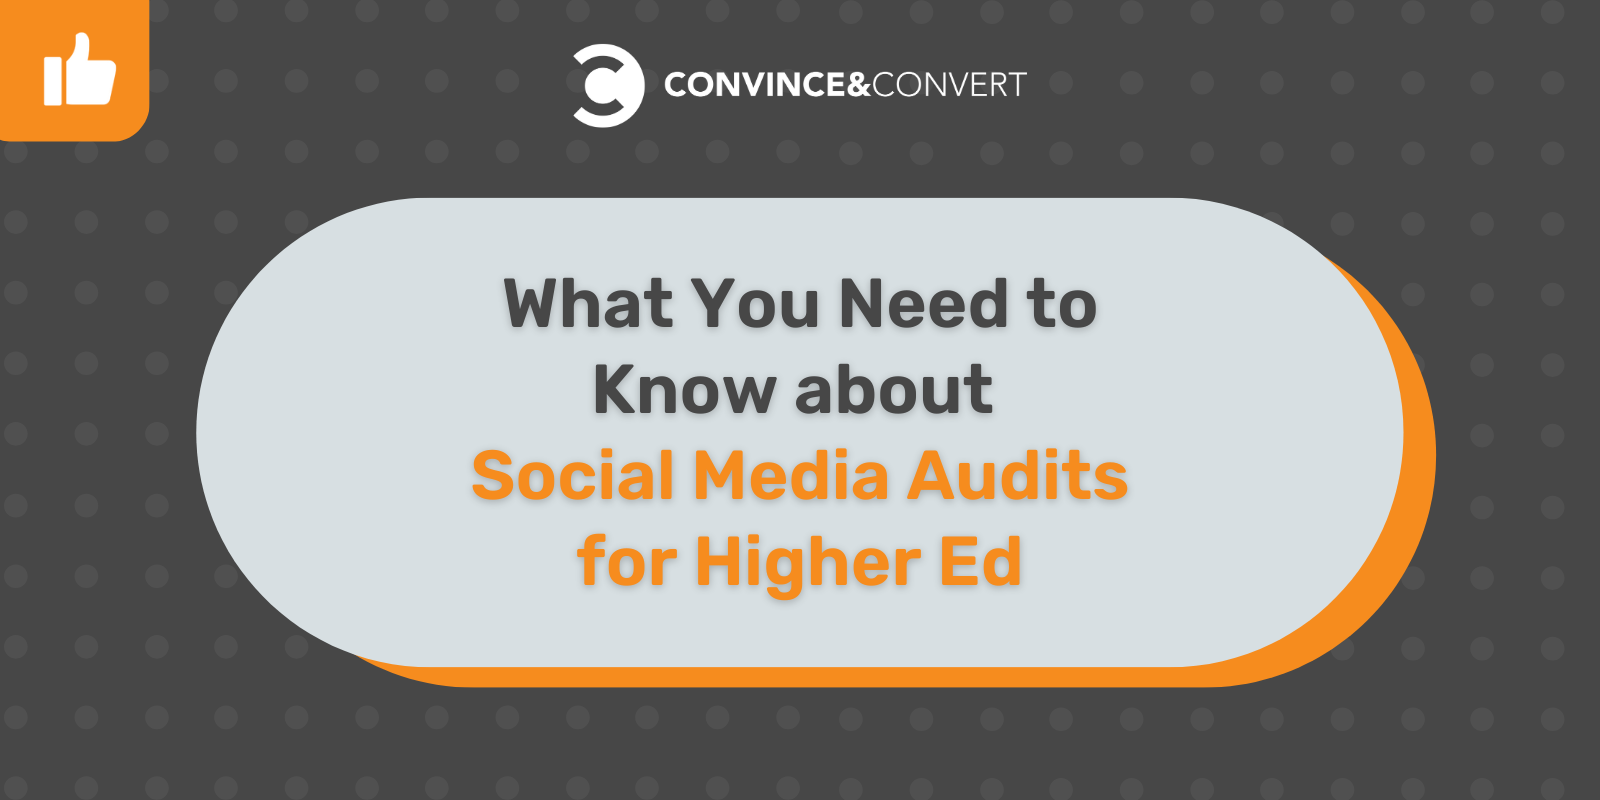 What You Need to Know about Social Media Audits for Higher Ed